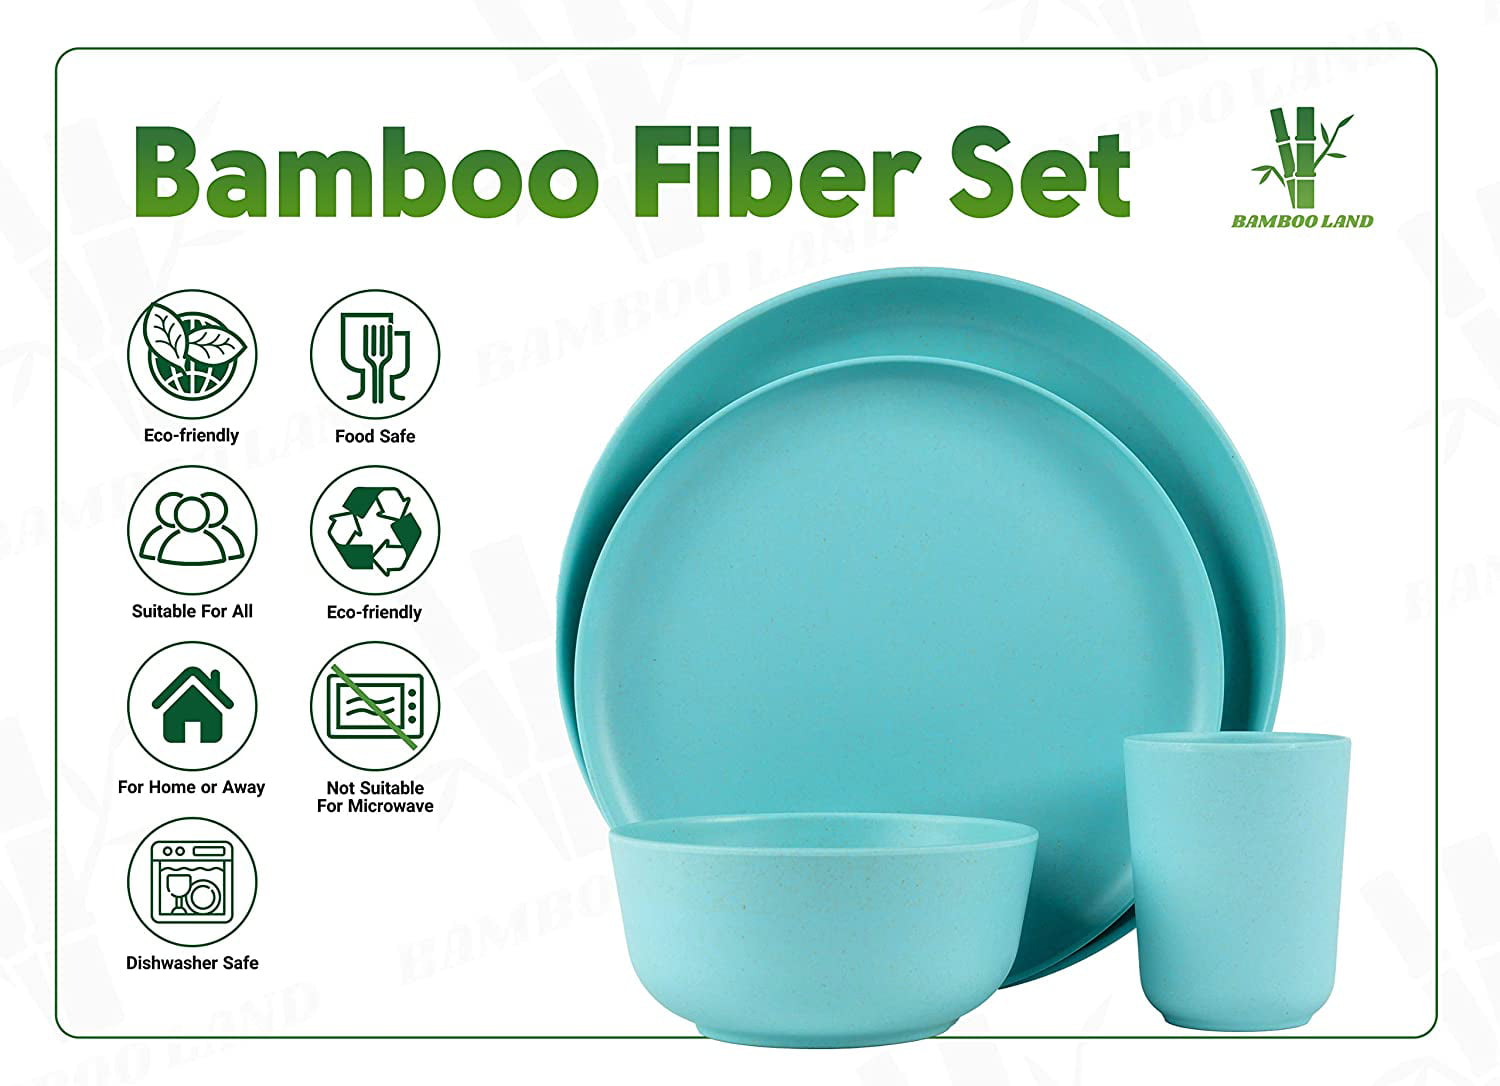 reusable bamboo dinnerware dorm dishware set BBQ Blue /bamboo fiber dinnerware dishwasher safe 16 PCS Wedding gift BAMBOO LAND Set for 4 person Picnic Party travel bowl and plate set 